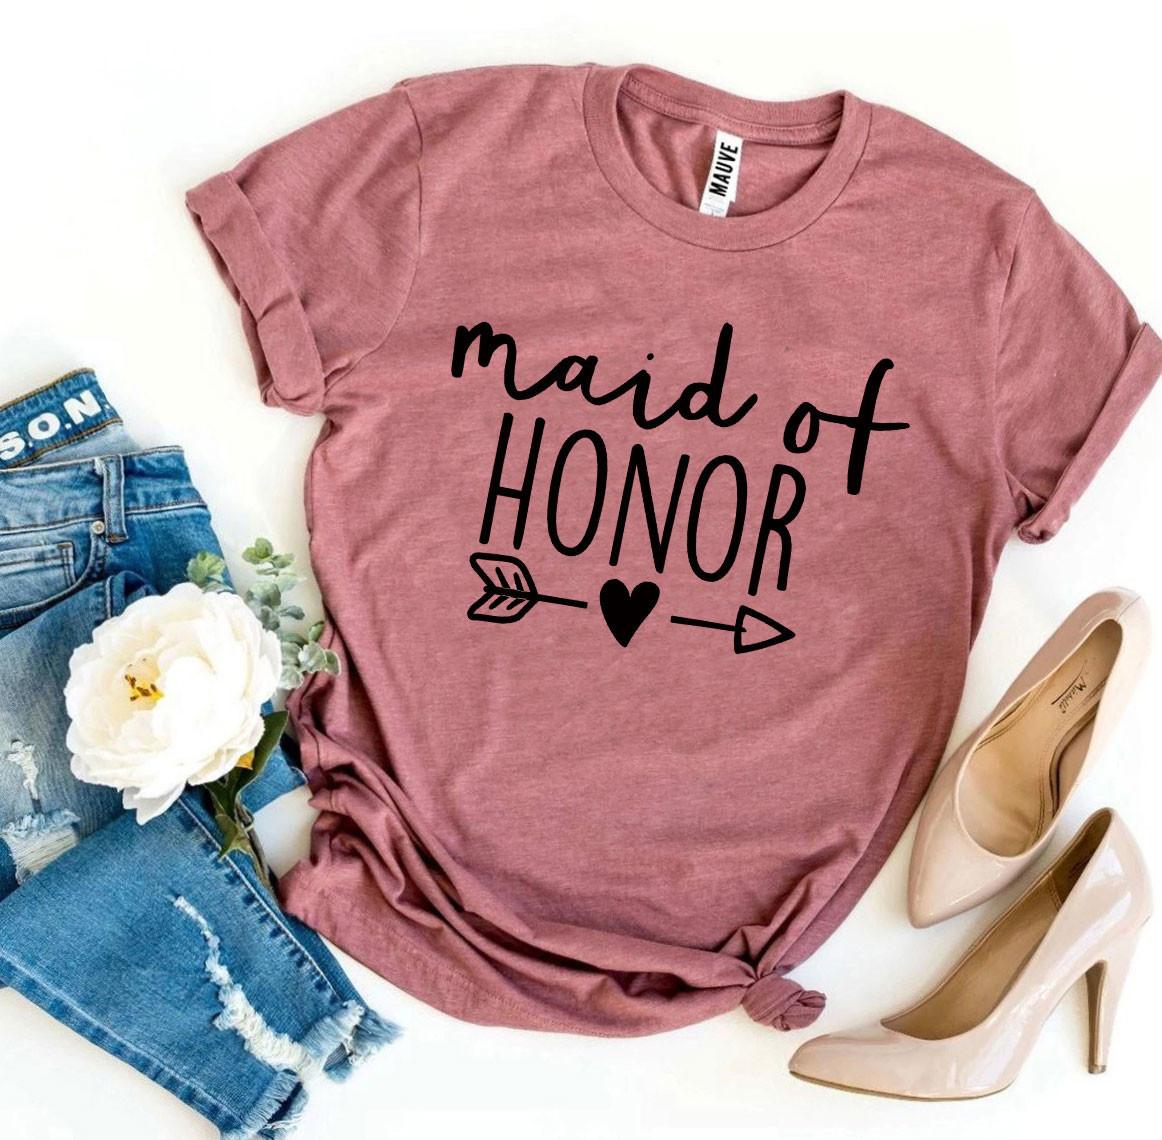 Maid Of Honor T-shirt